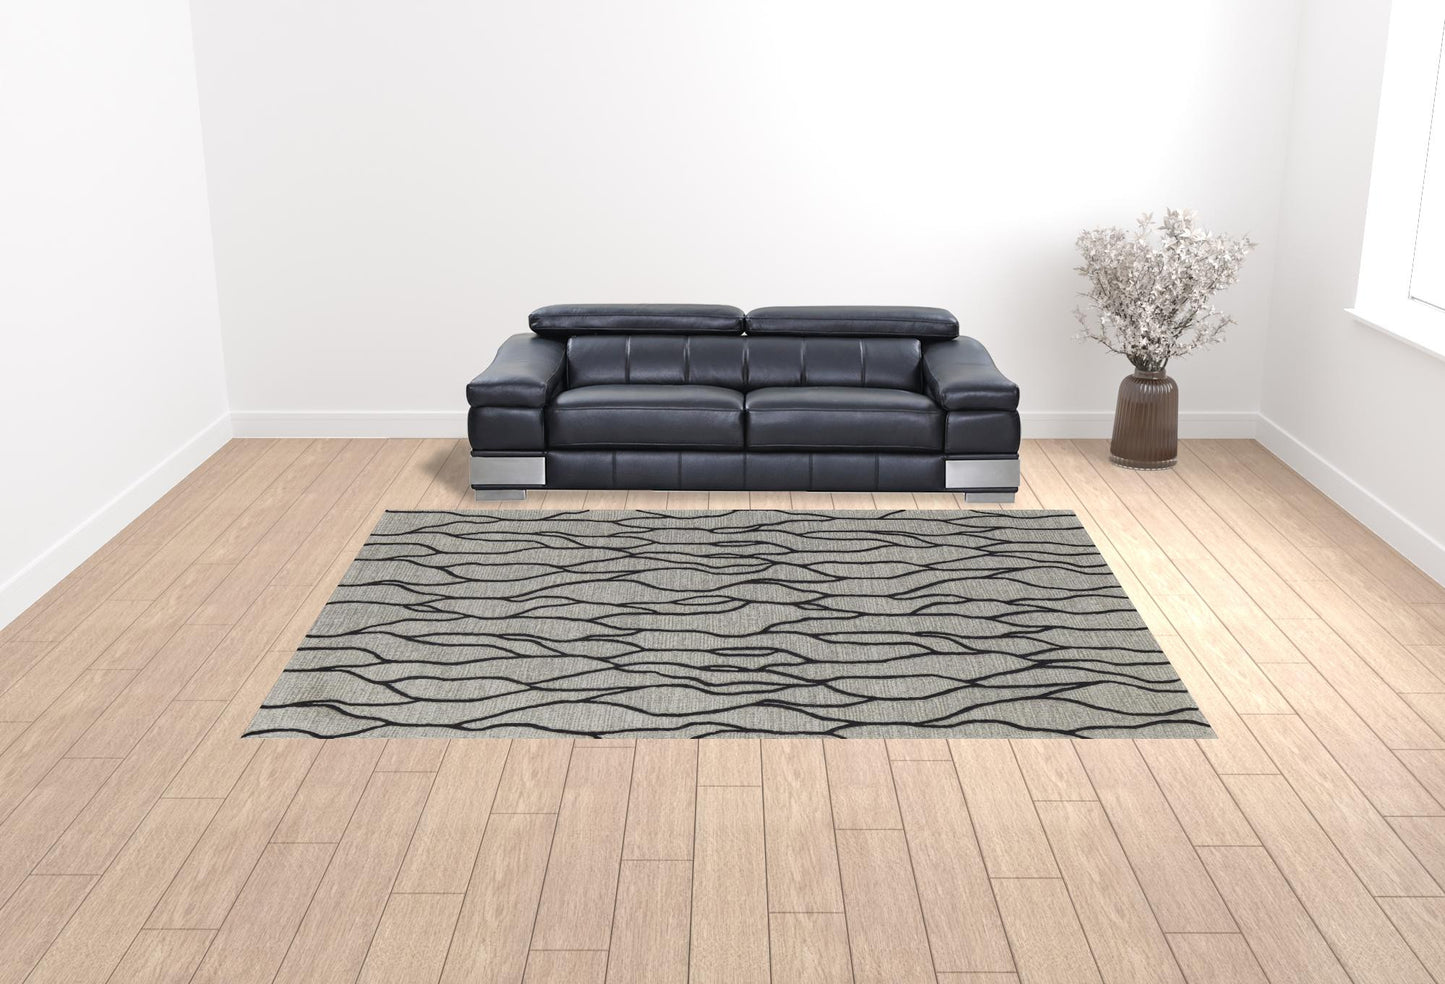 5' X 8' Taupe Black And Gray Wool Abstract Tufted Handmade Stain Resistant Area Rug